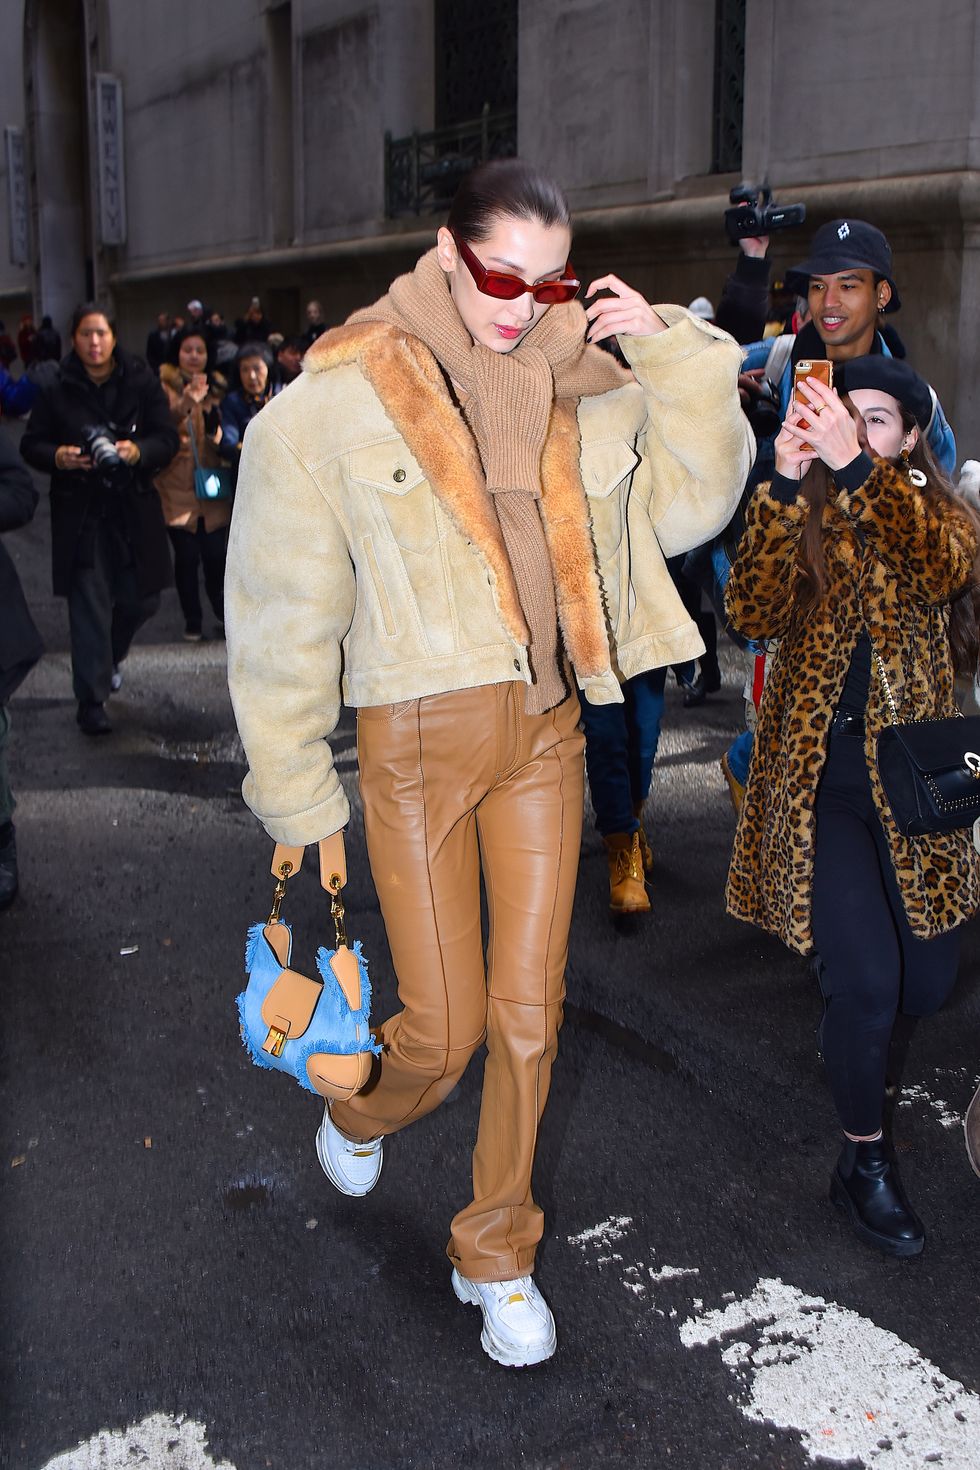 7 Of Bella Hadid's Favorite Shoe Styles To Add To Your Closet